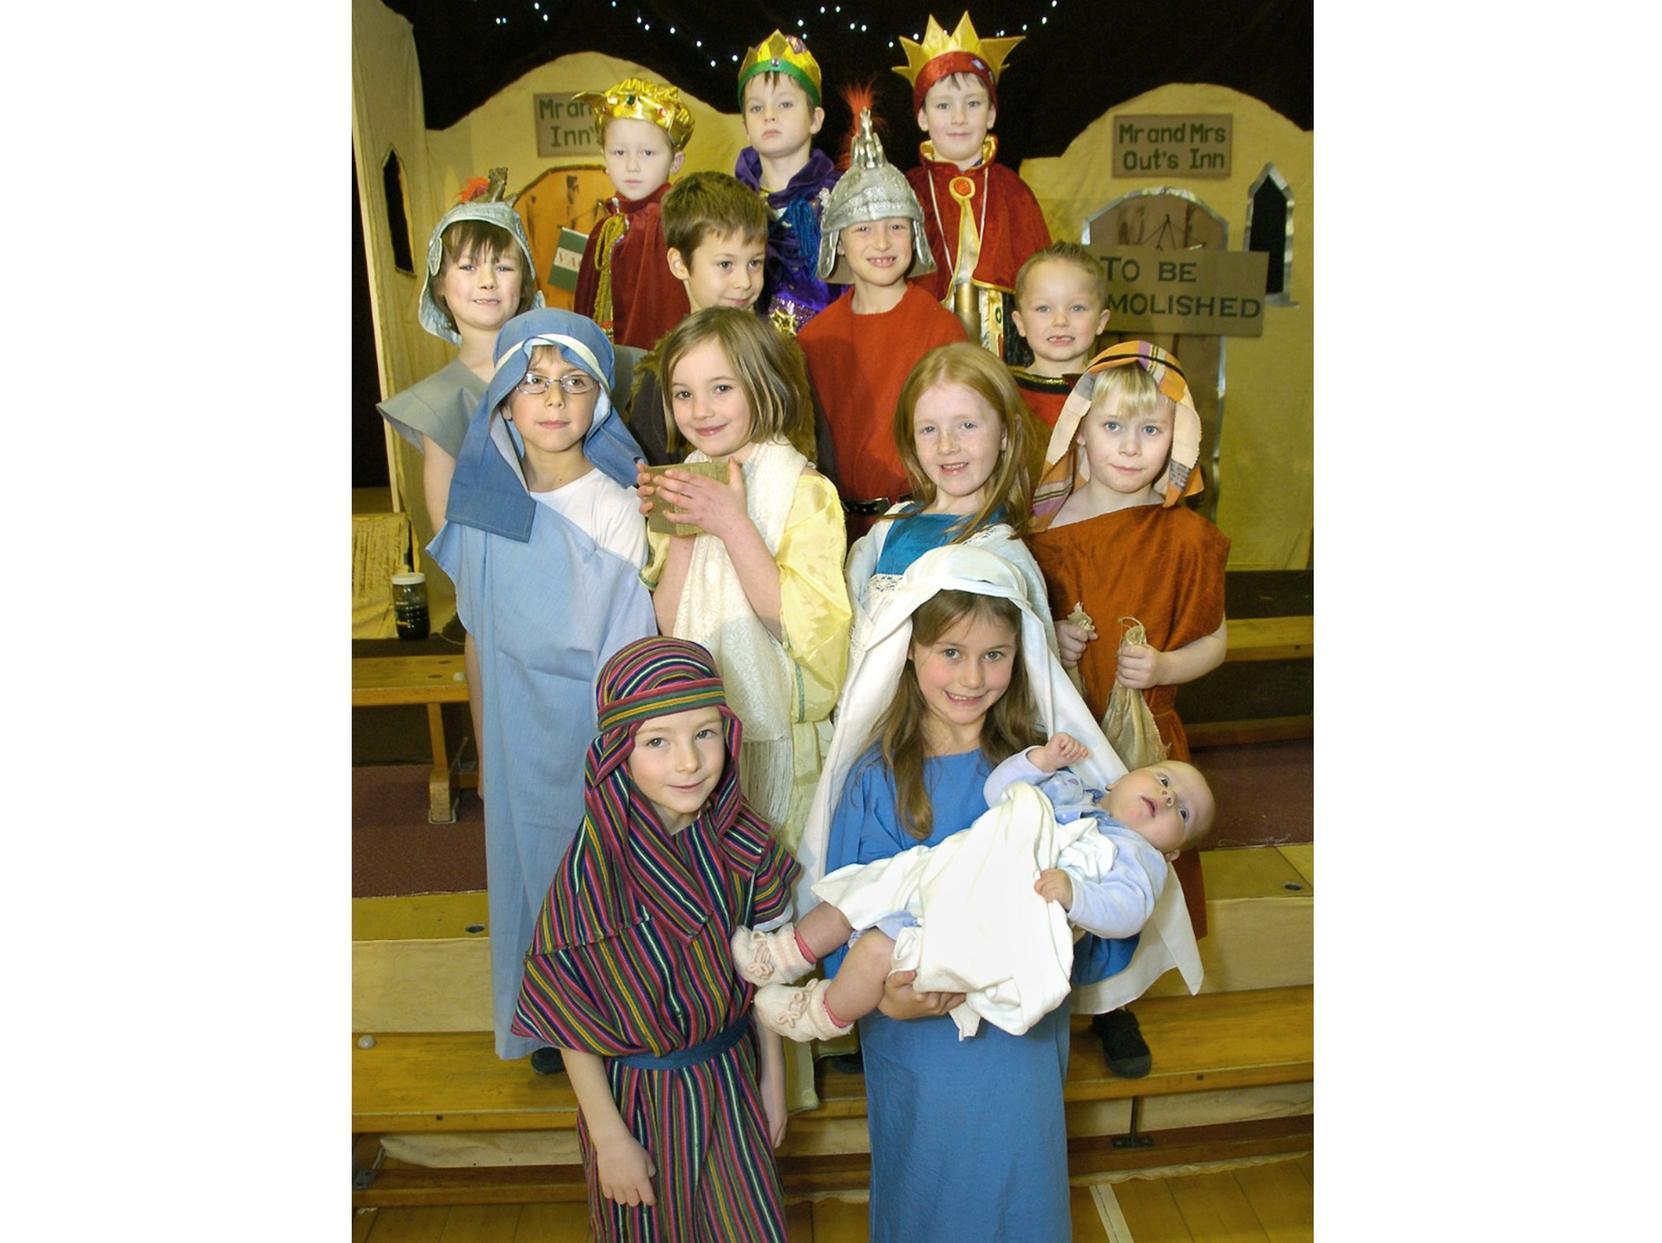 Isaac Hicks as Joseph and Zara Teasdale as Mary, with a live baby Jesus Jemima Clements.